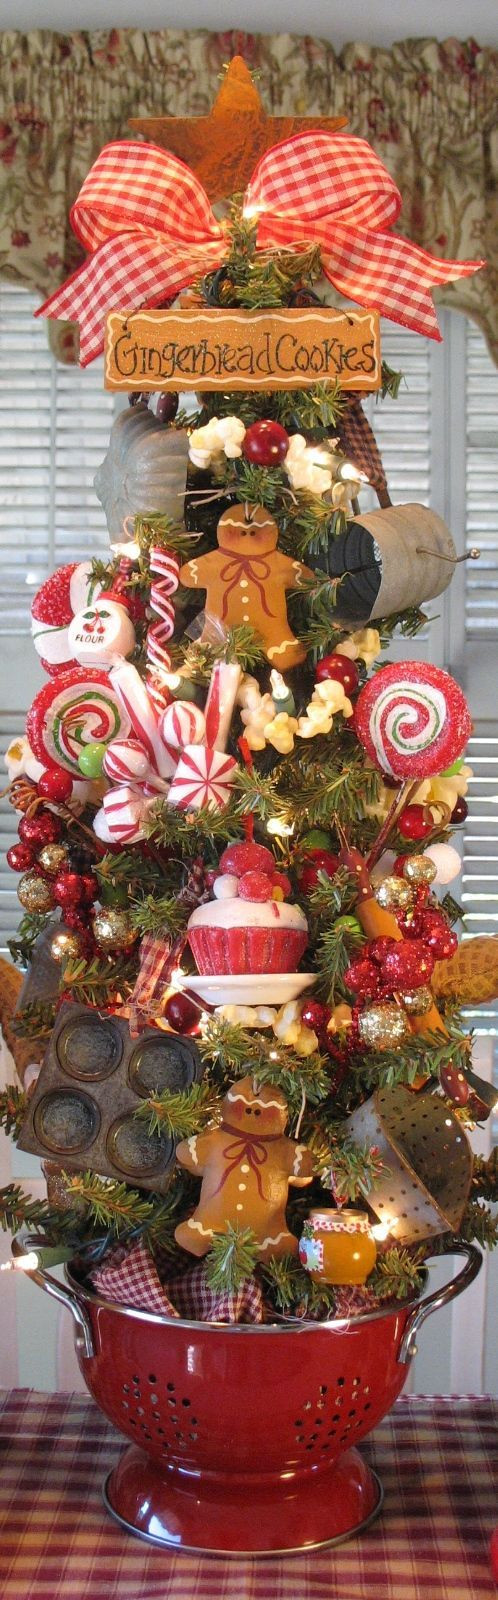 Kitchen Christmas Tree
 Gingerbread Tree For Kitchen s and